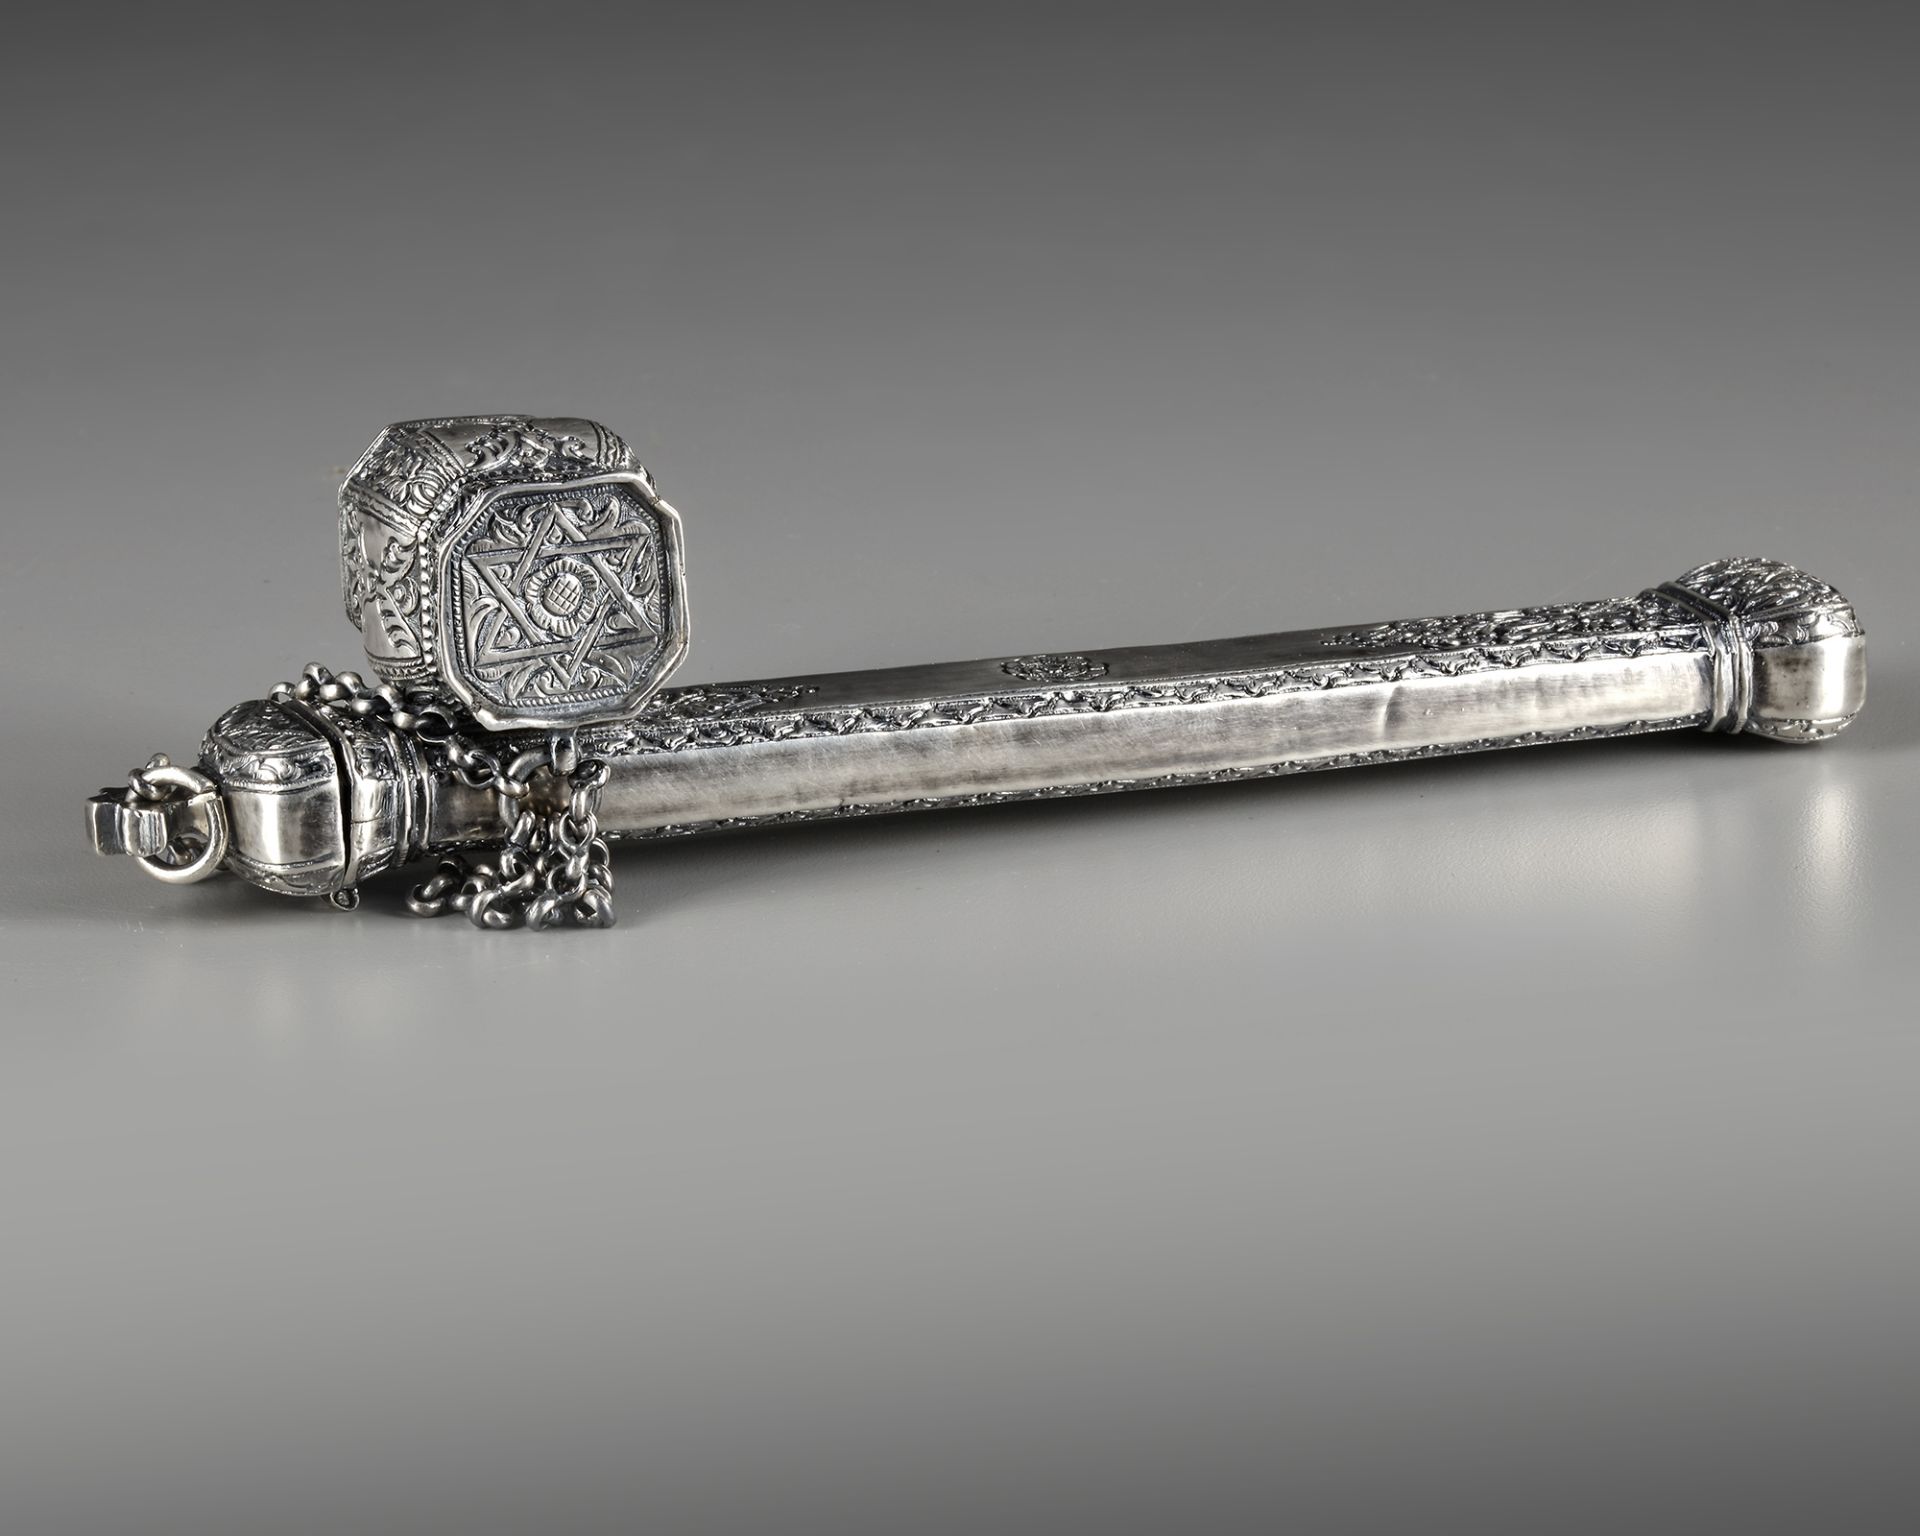 A SILVER PENCASE (DIVIT) OTTOMAN GREECE, LATE 18TH-EARLY 19TH CENTURY - Image 5 of 5